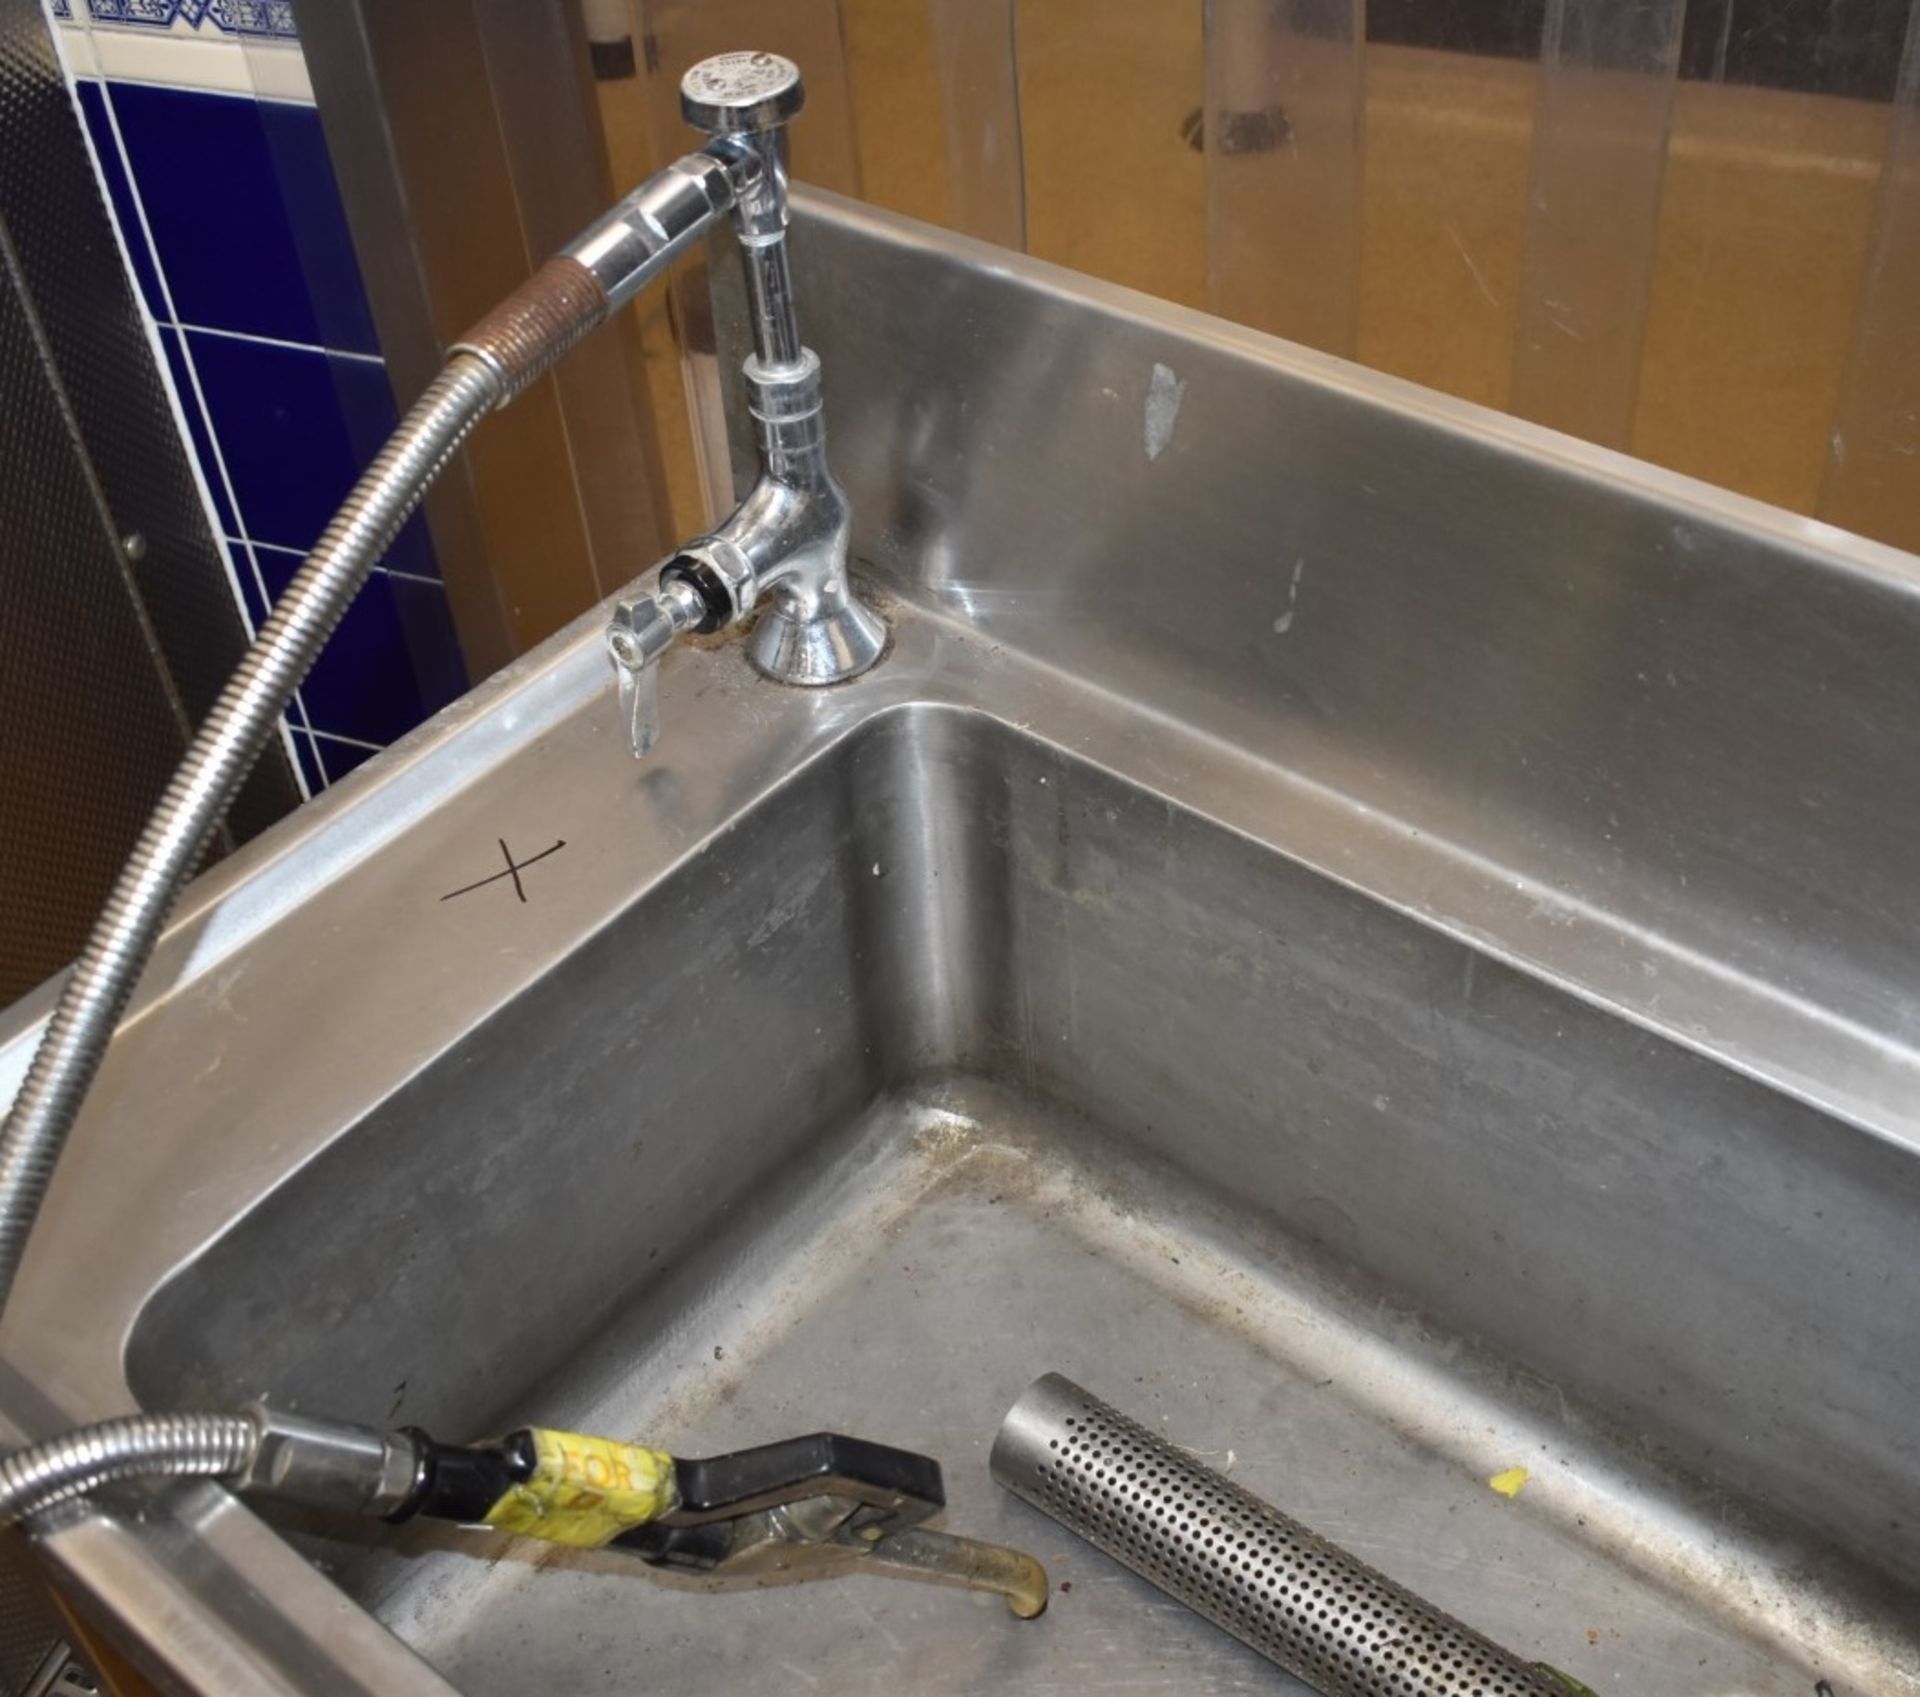 1 x Stainless Steel Sink Basin Wash Unit With Splashback and Hose Rinser Tap - H81 x W105 x D50 - Image 2 of 4